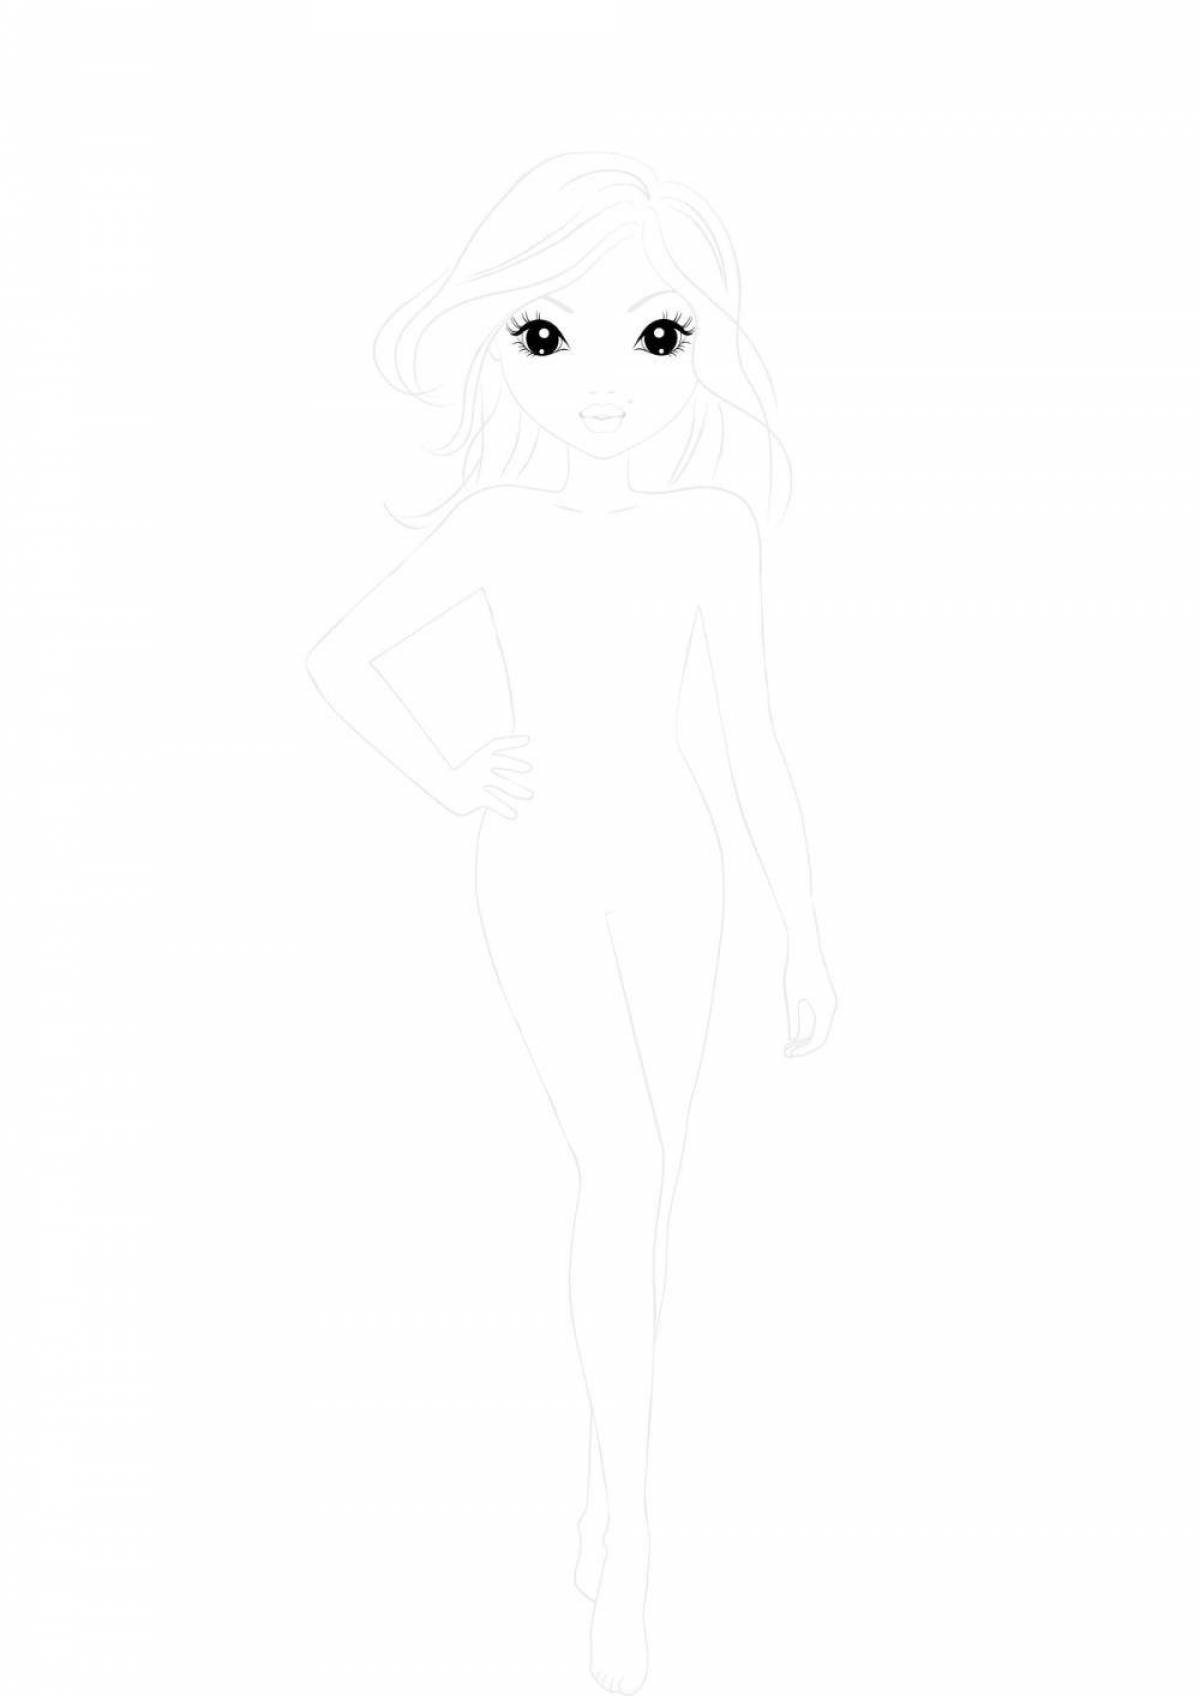 Adorable top models coloring page